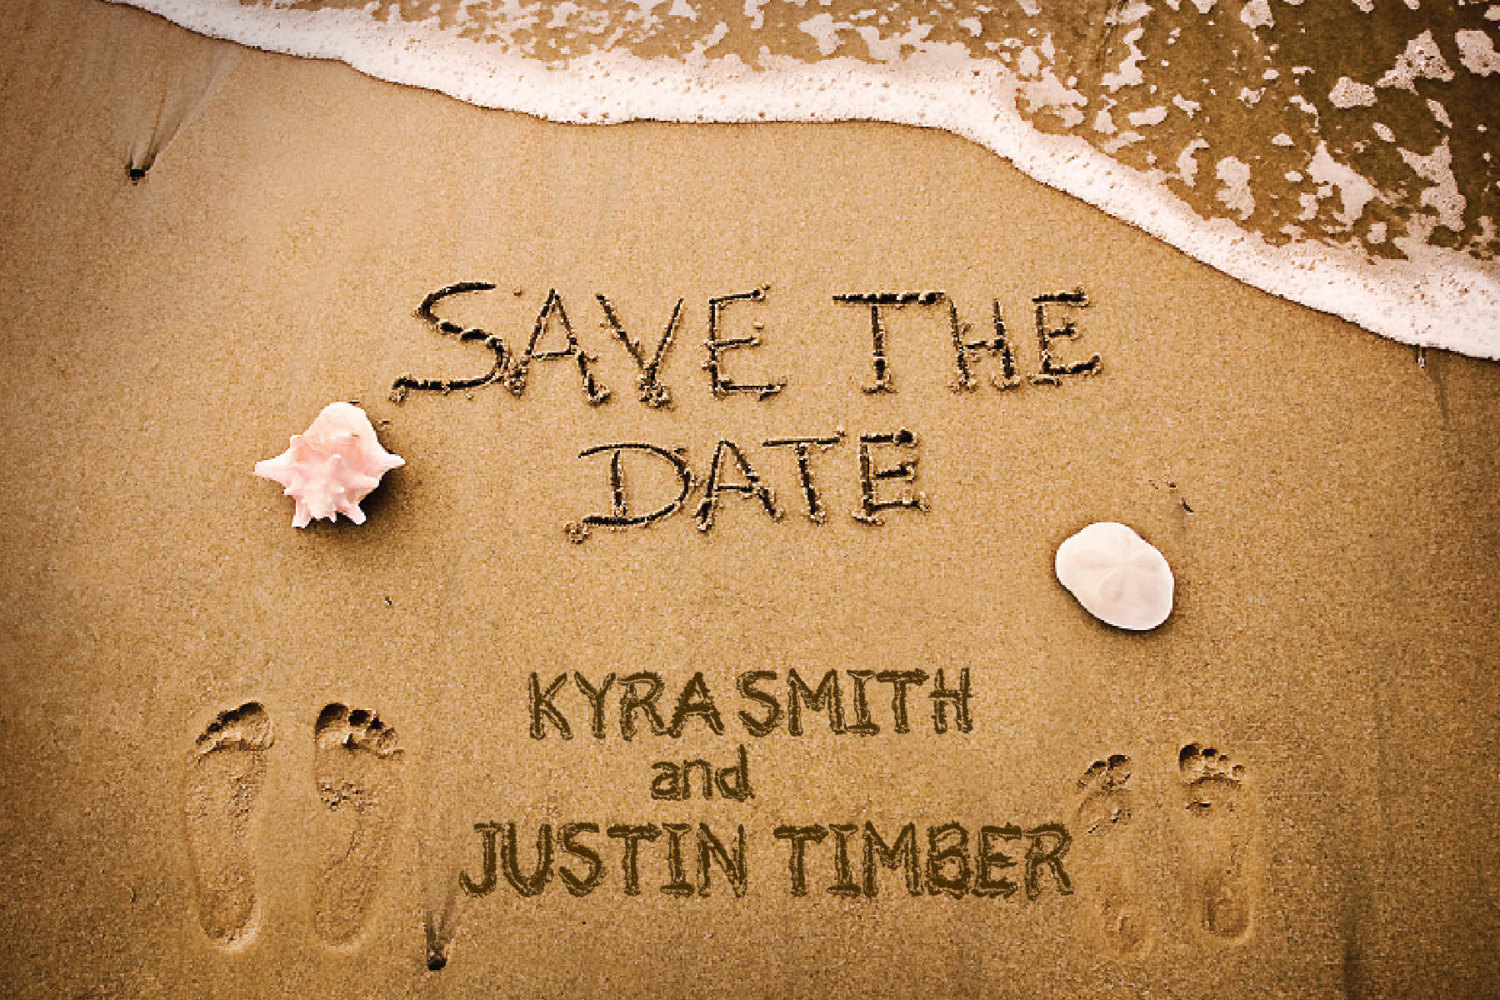 Save the Date Ideas | Save the Dates | Wedding Save the Dates | Wedding Planning | Wedding Planning: Save the Dates 